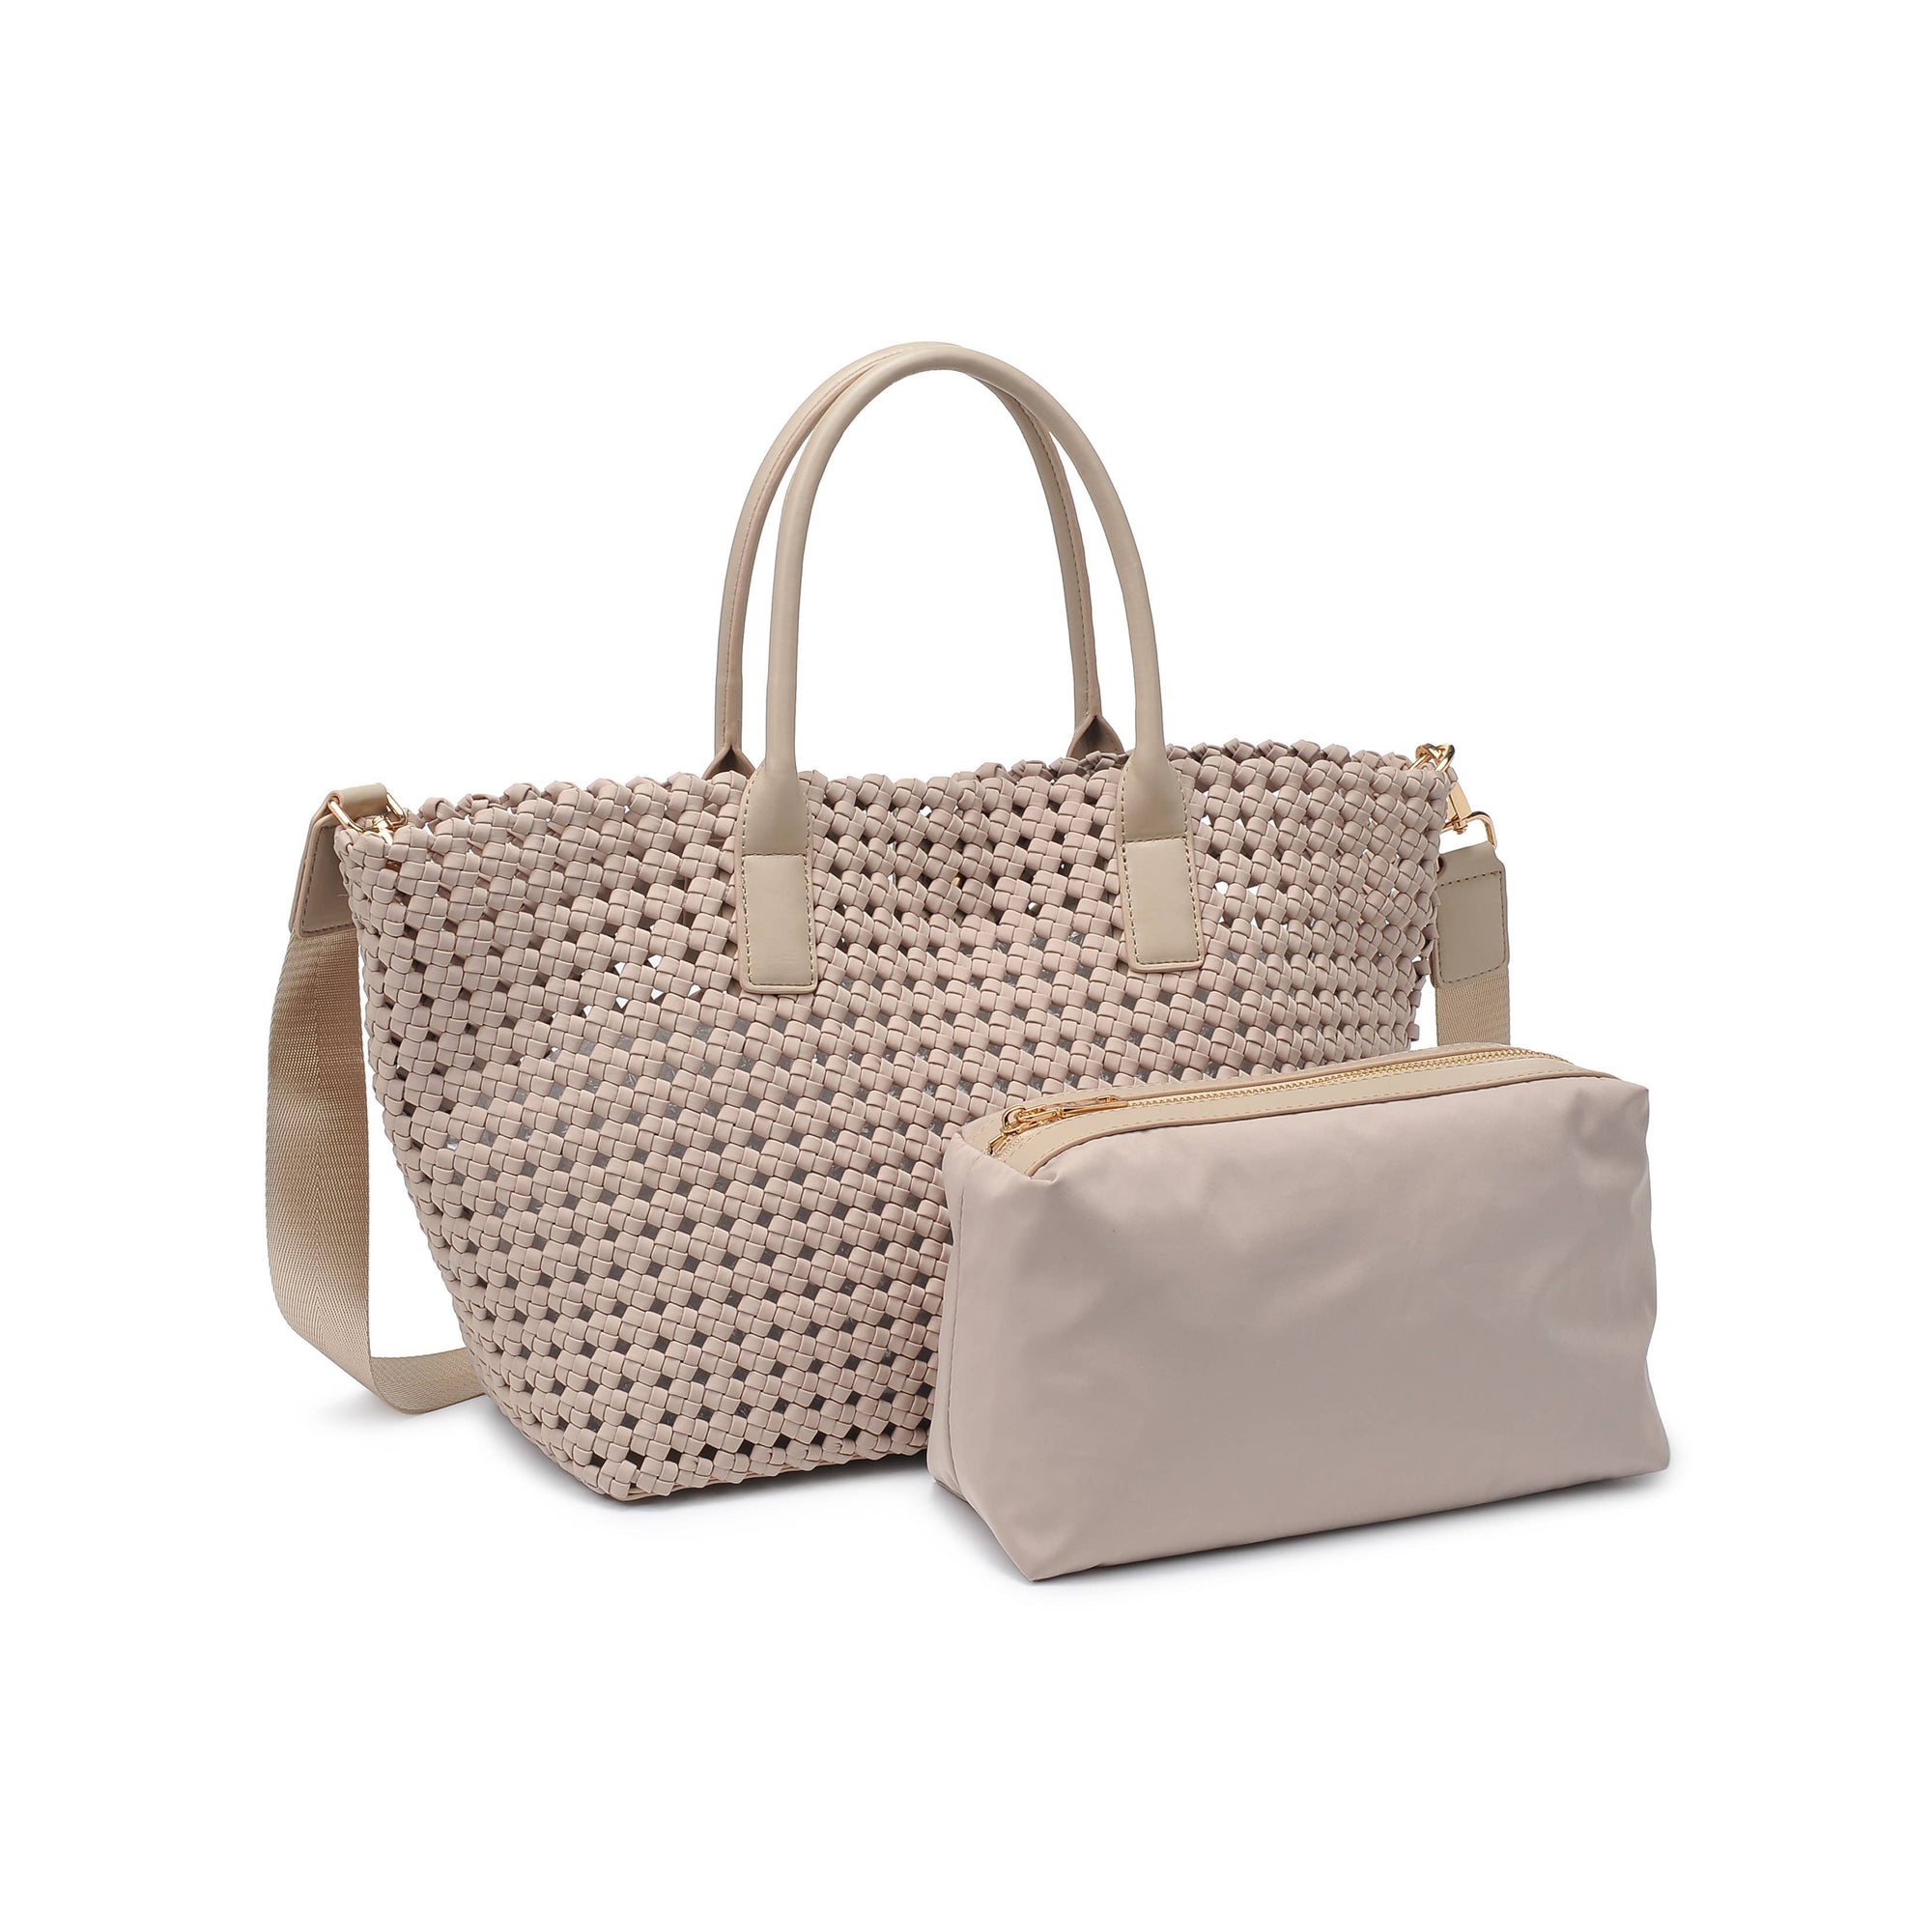 Solstice - Medium  Hand Woven Knot Tote: Nude